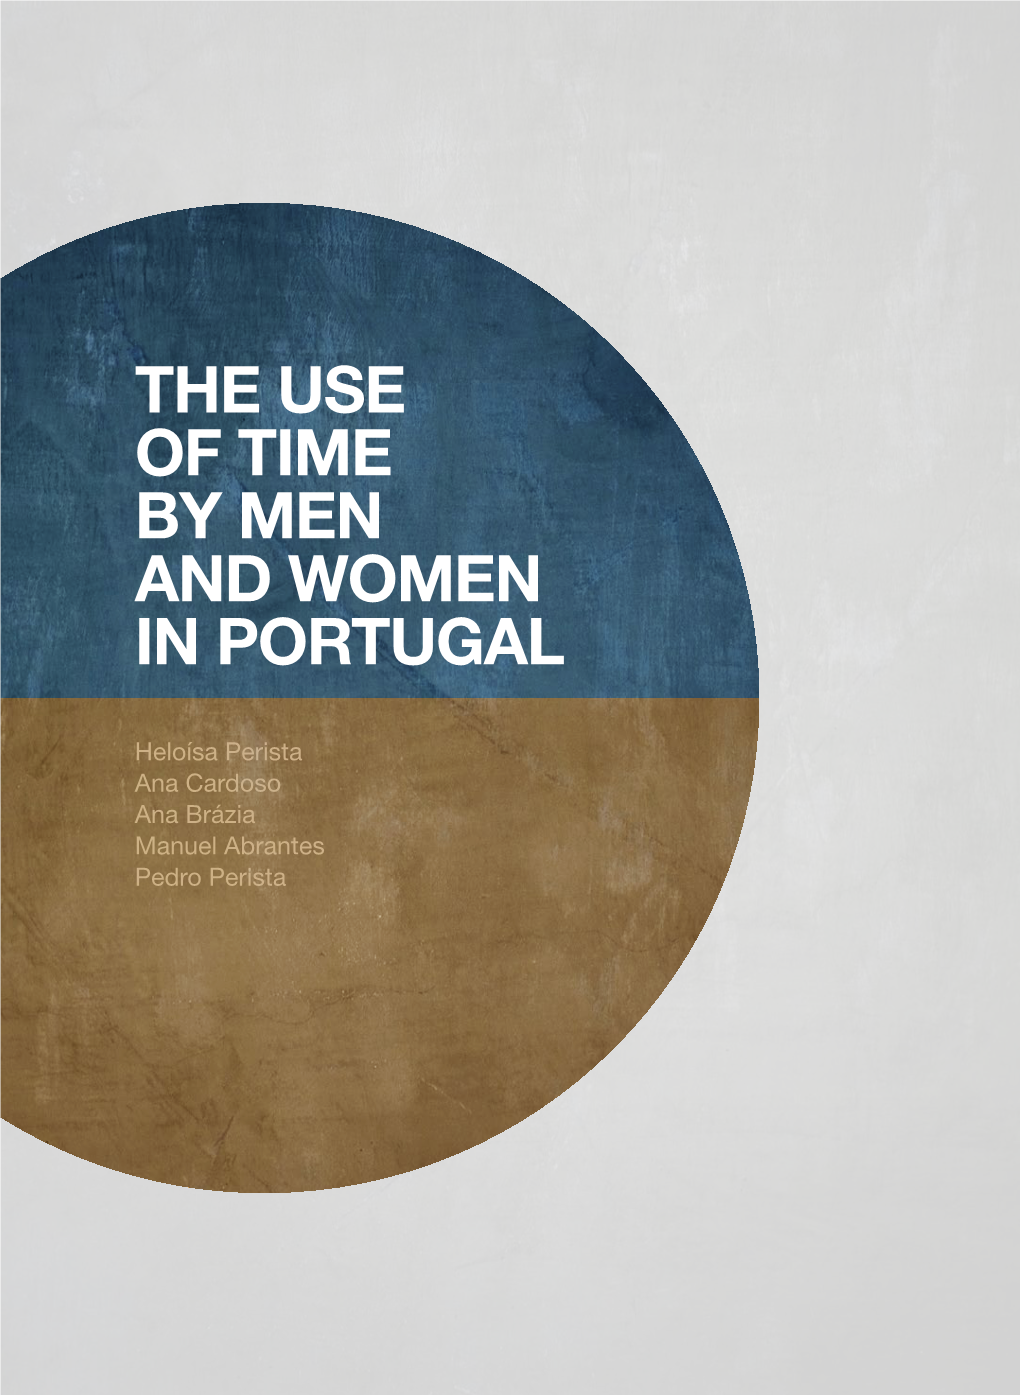 The Use of Time by Men and Women in Portugal